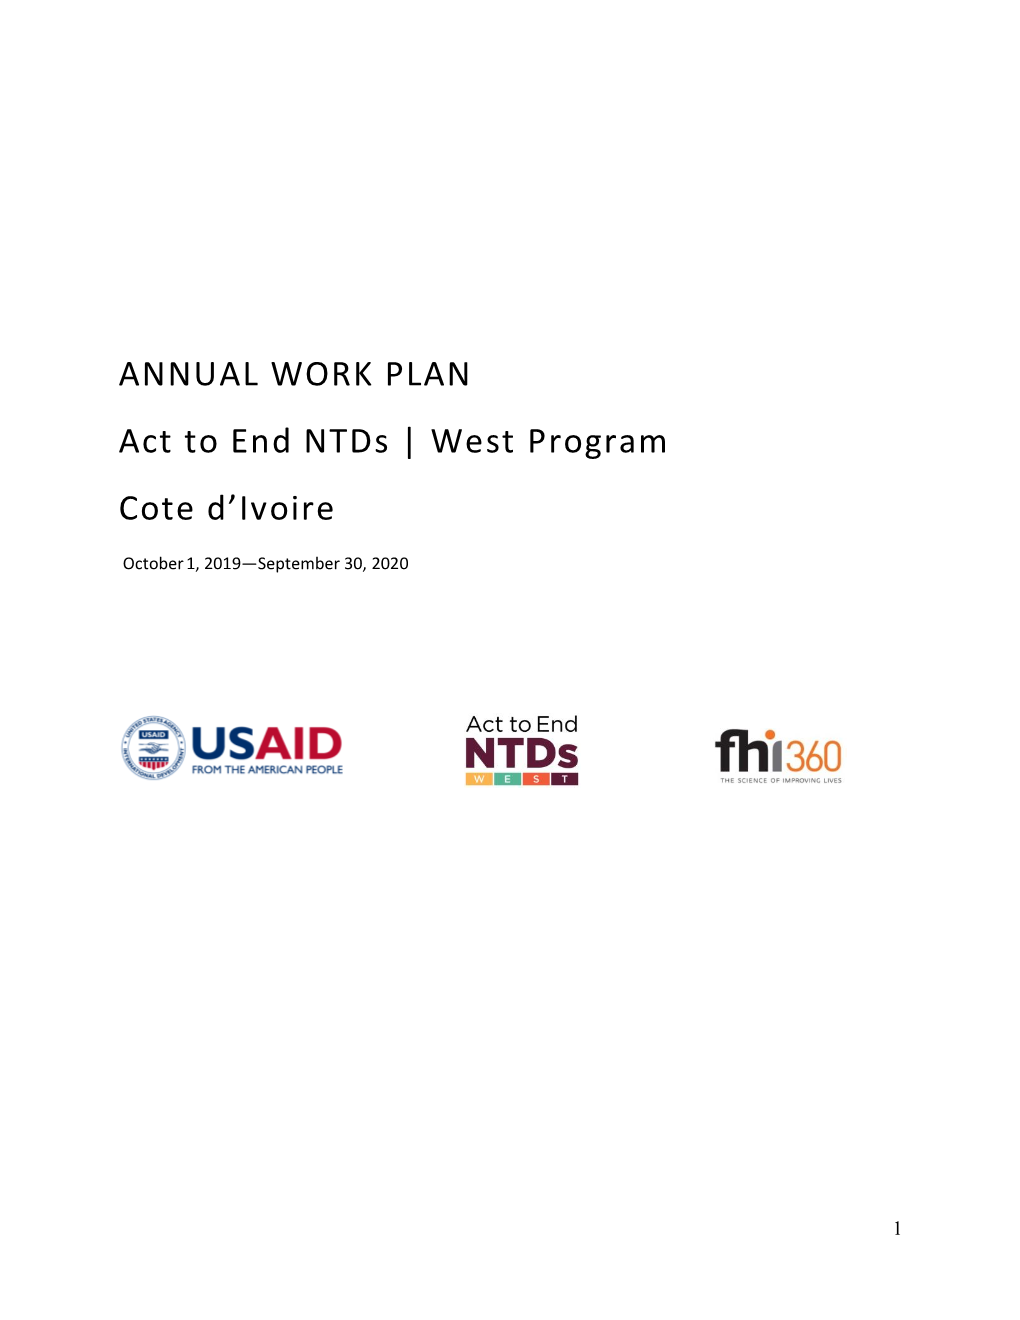 ANNUAL WORK PLAN Act to End Ntds | West Program Cote D'ivoire